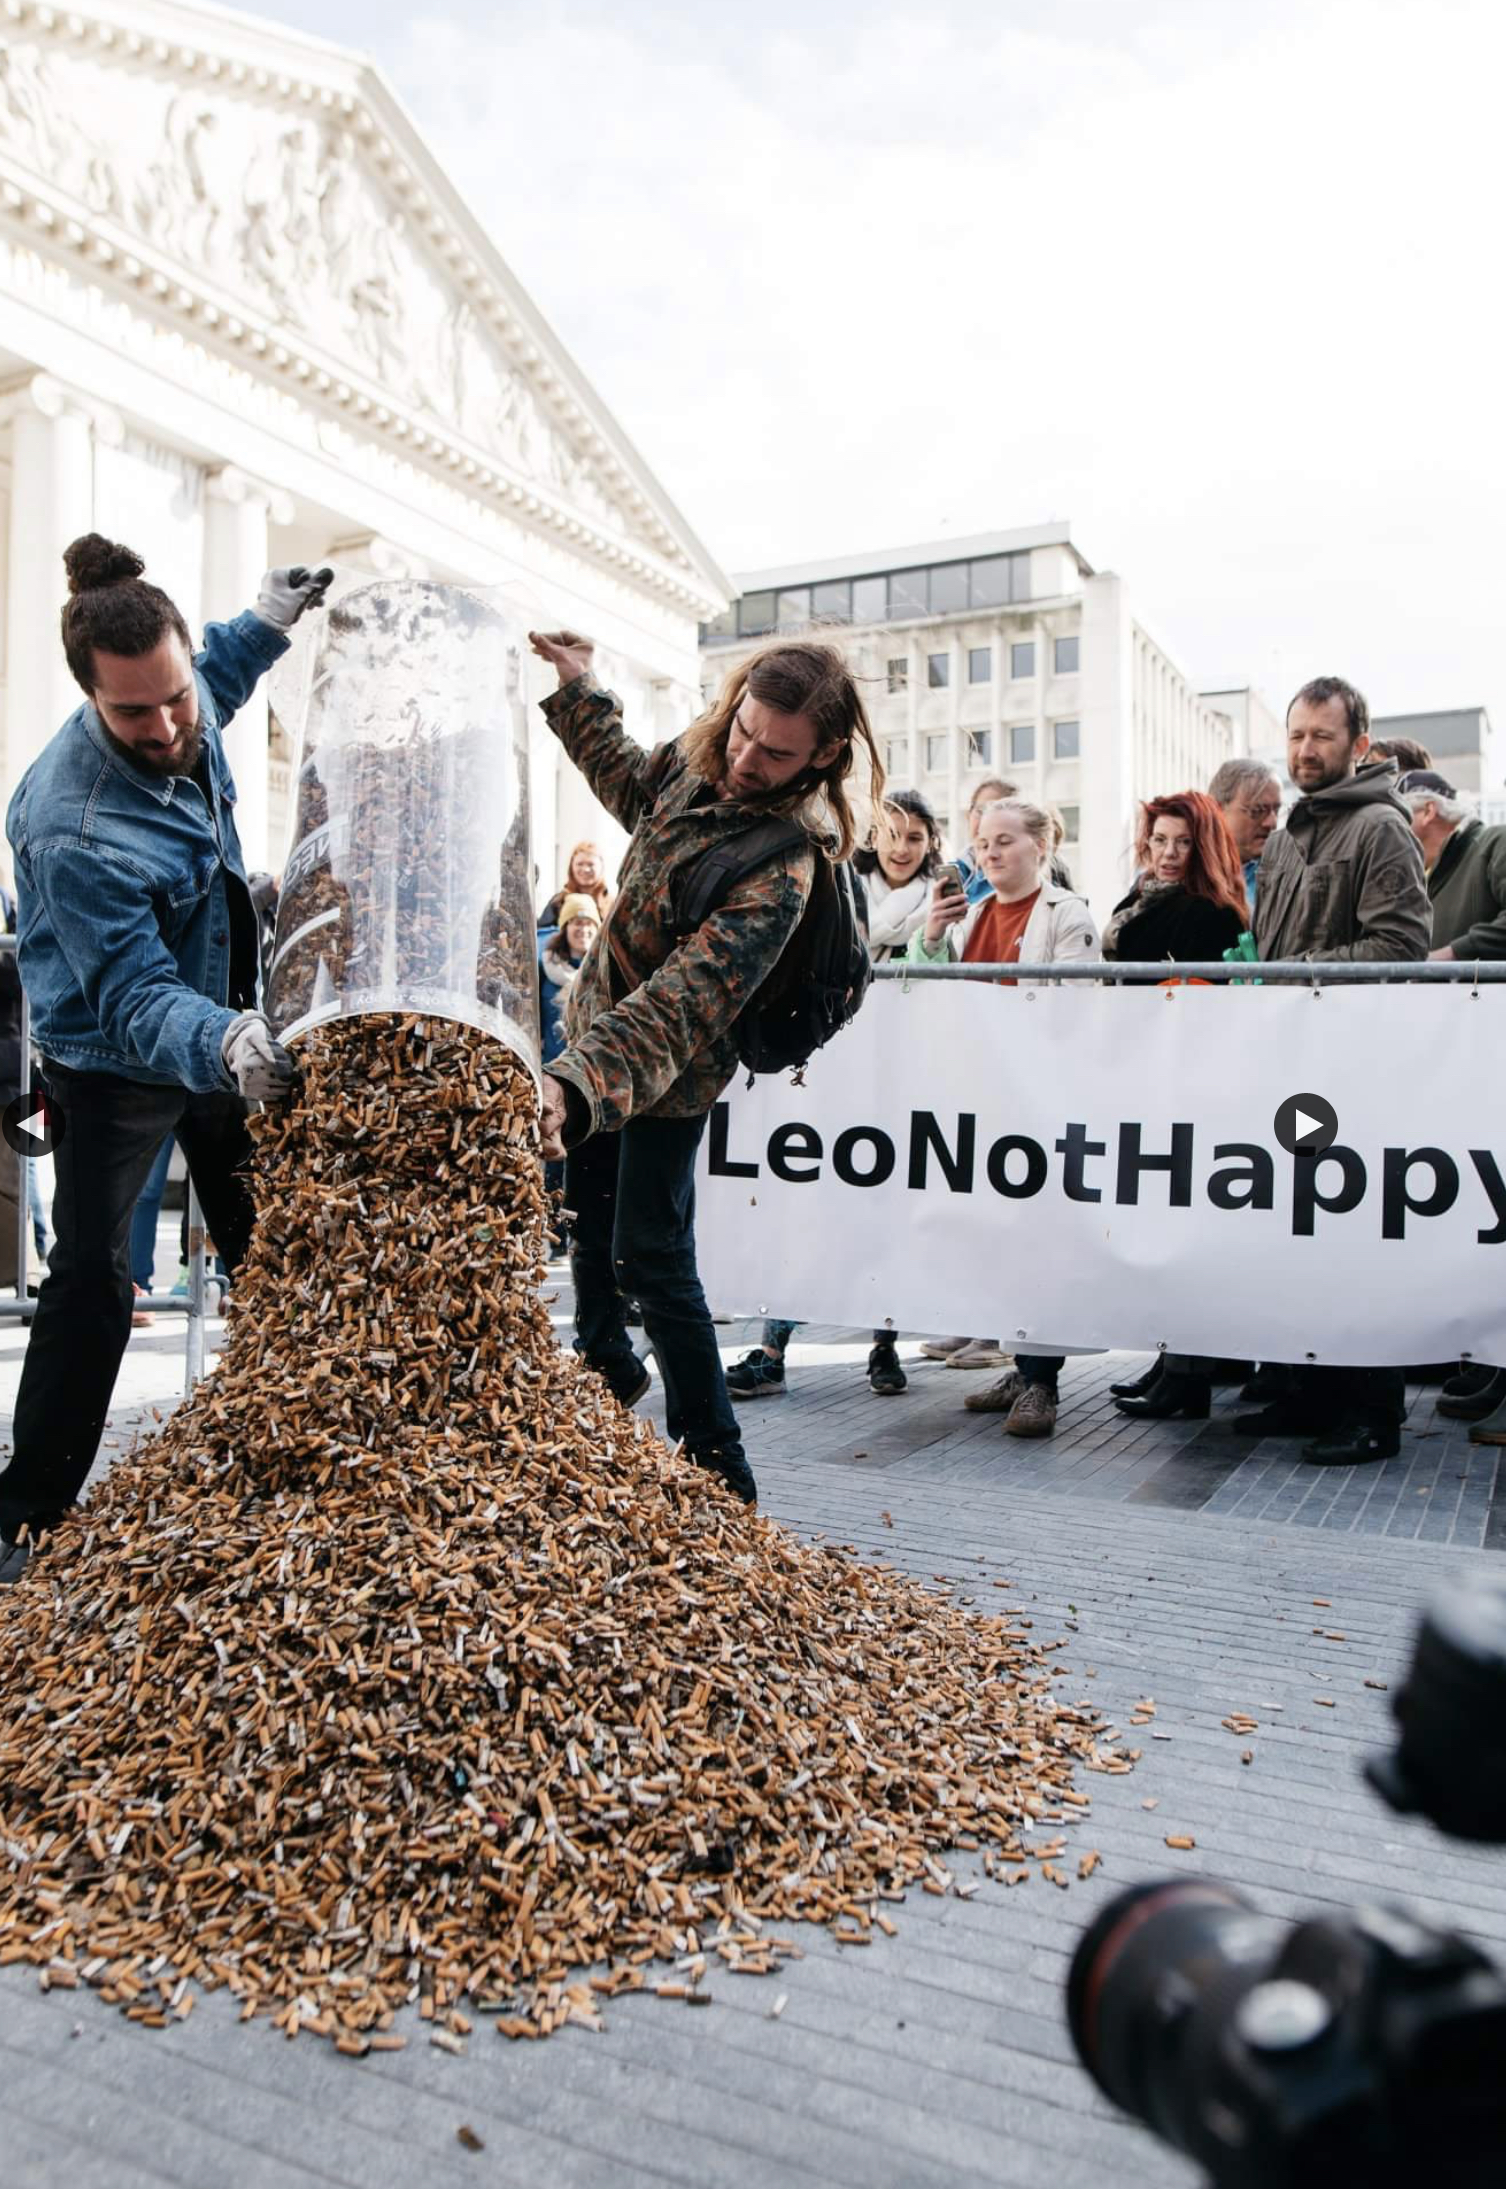 Every second 137,000 cigarette butts are thrown on the street in the world which is 4.3 billion per year.